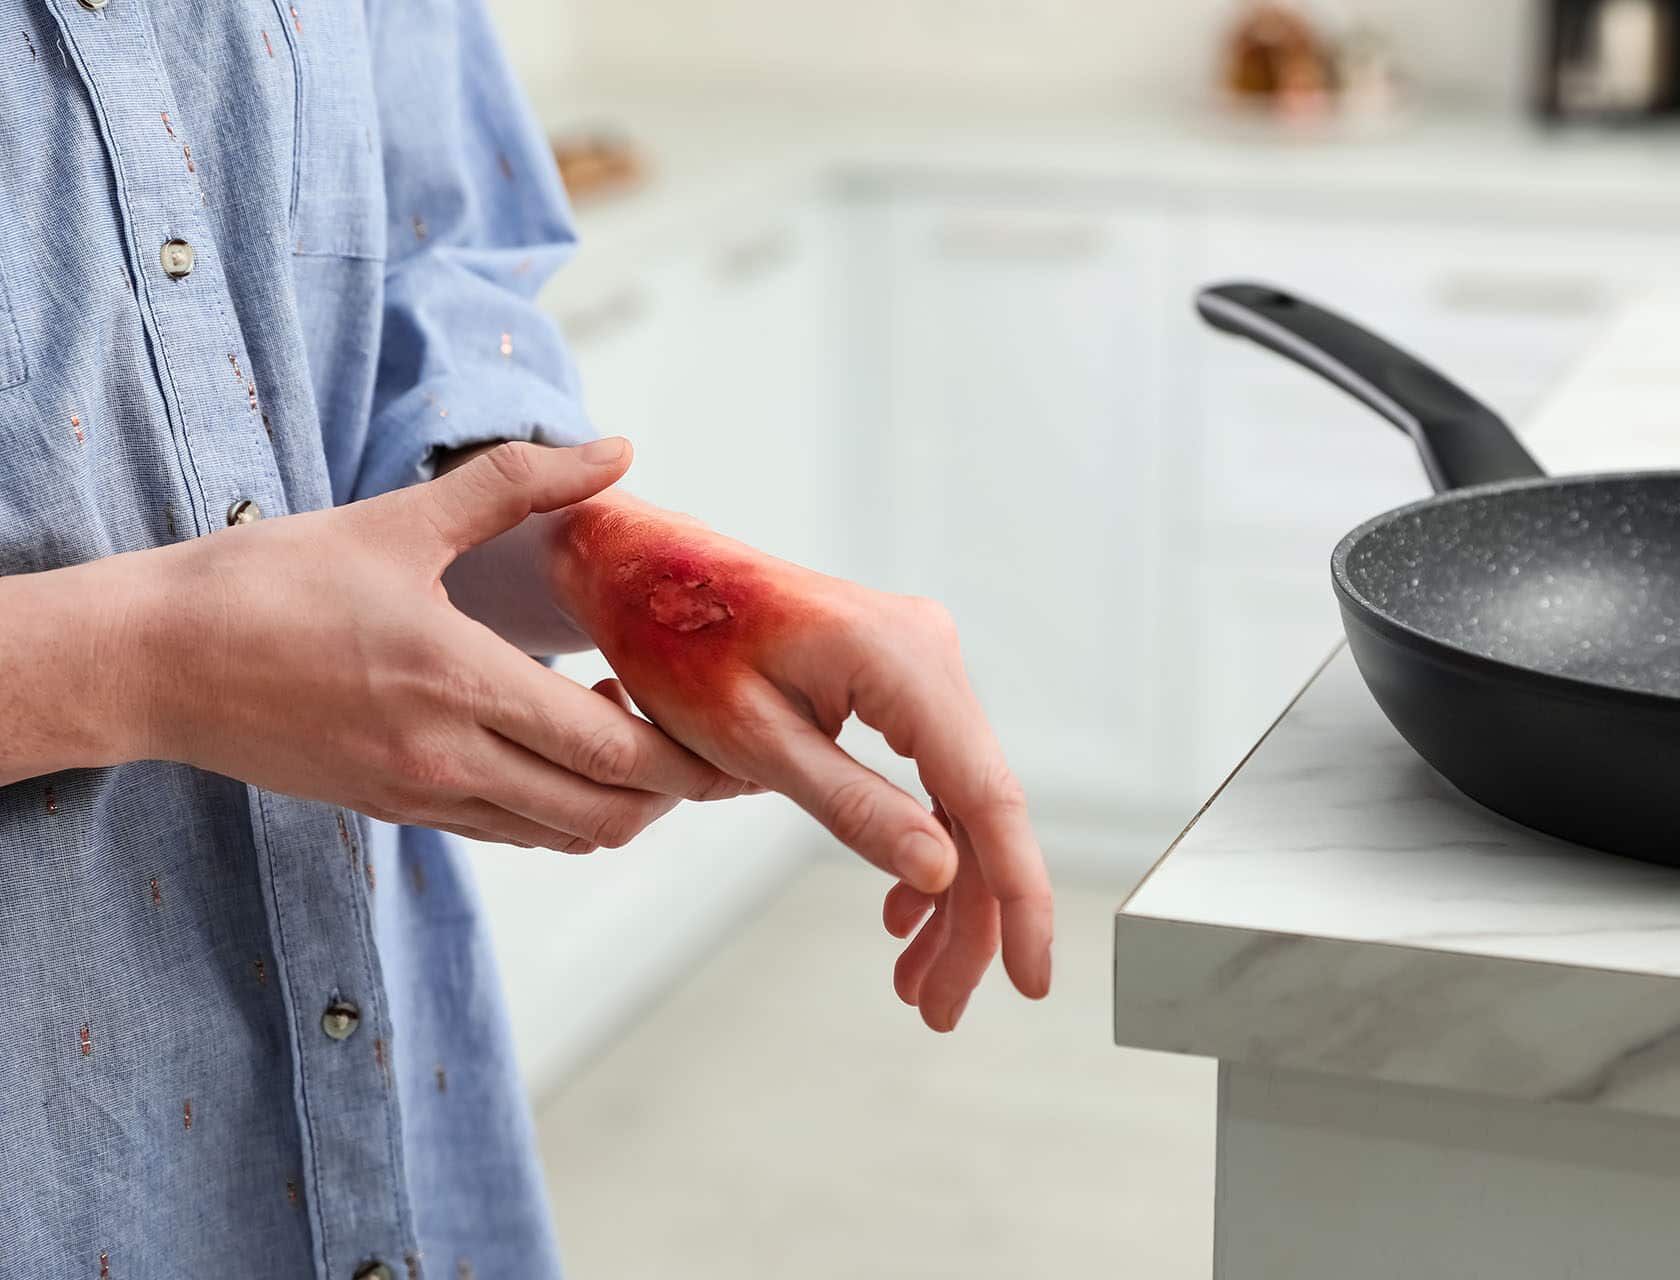 Woman with burn on her hand in kitchen